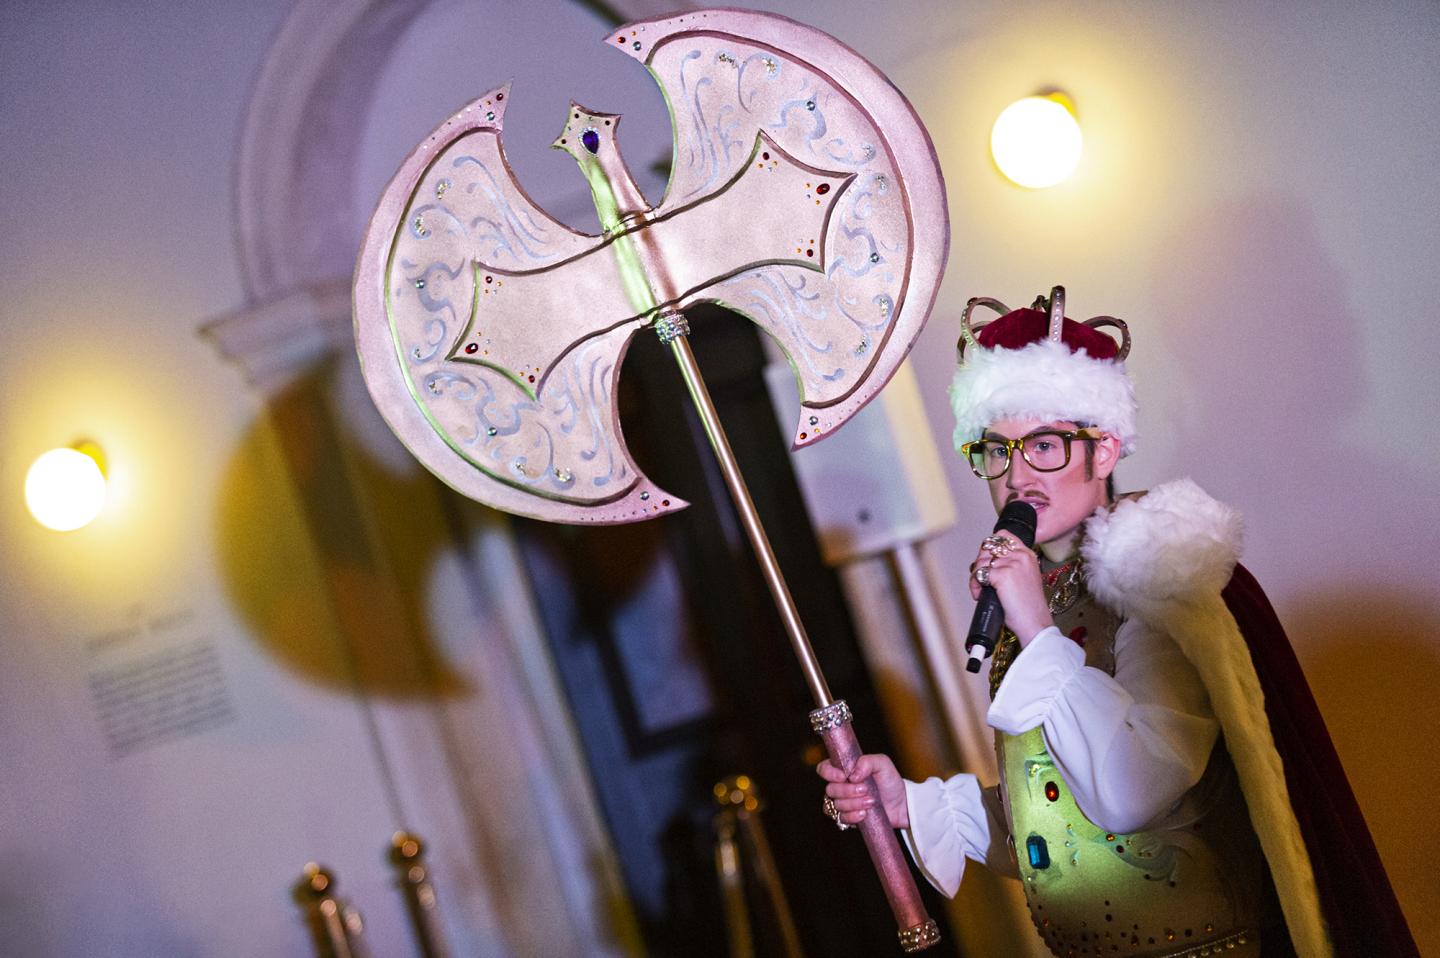 Drag king Adam All holds a huge novelty sledgehammer while performing at the Queen's House